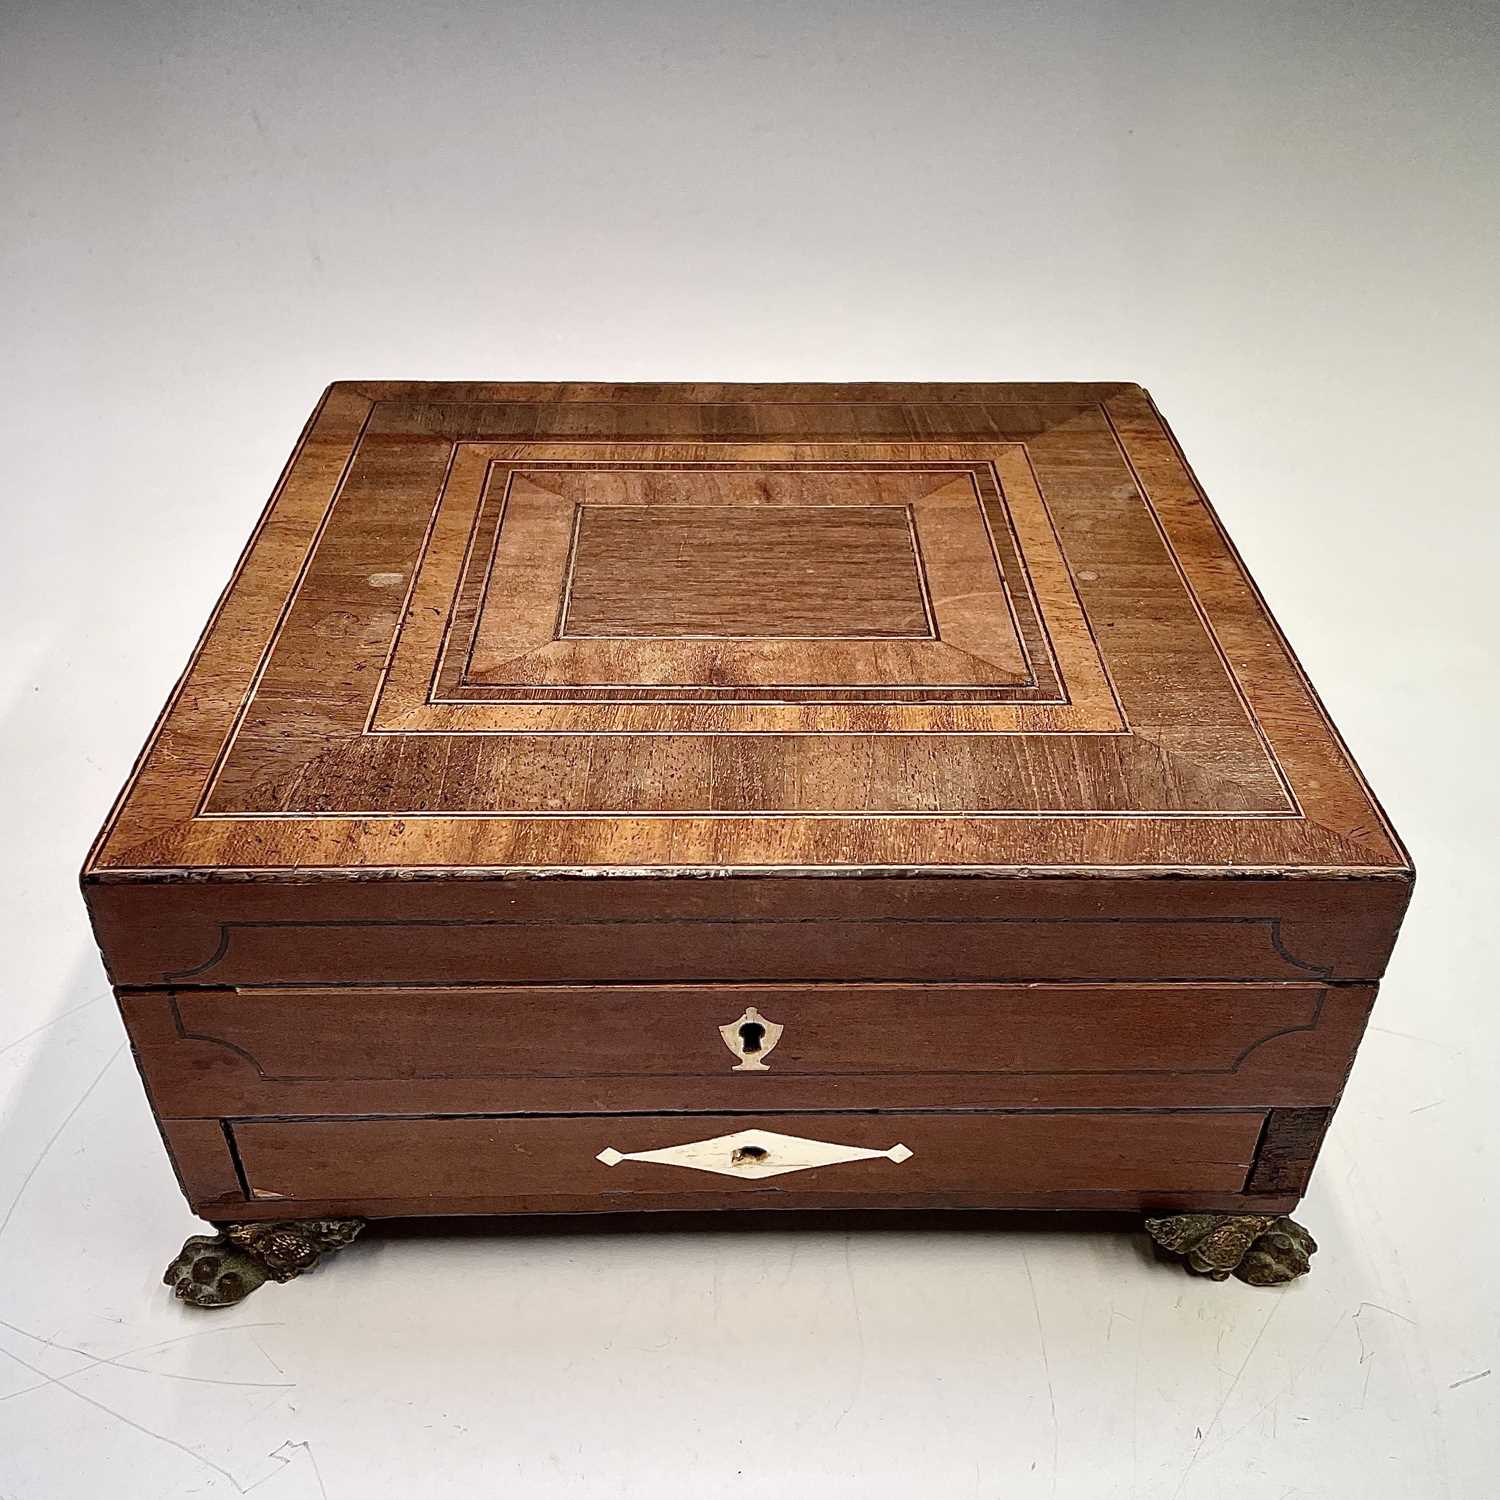 A Regency mahogany inlaid and crossbanded work box, with fitted interior and a lower drawer with - Image 4 of 7